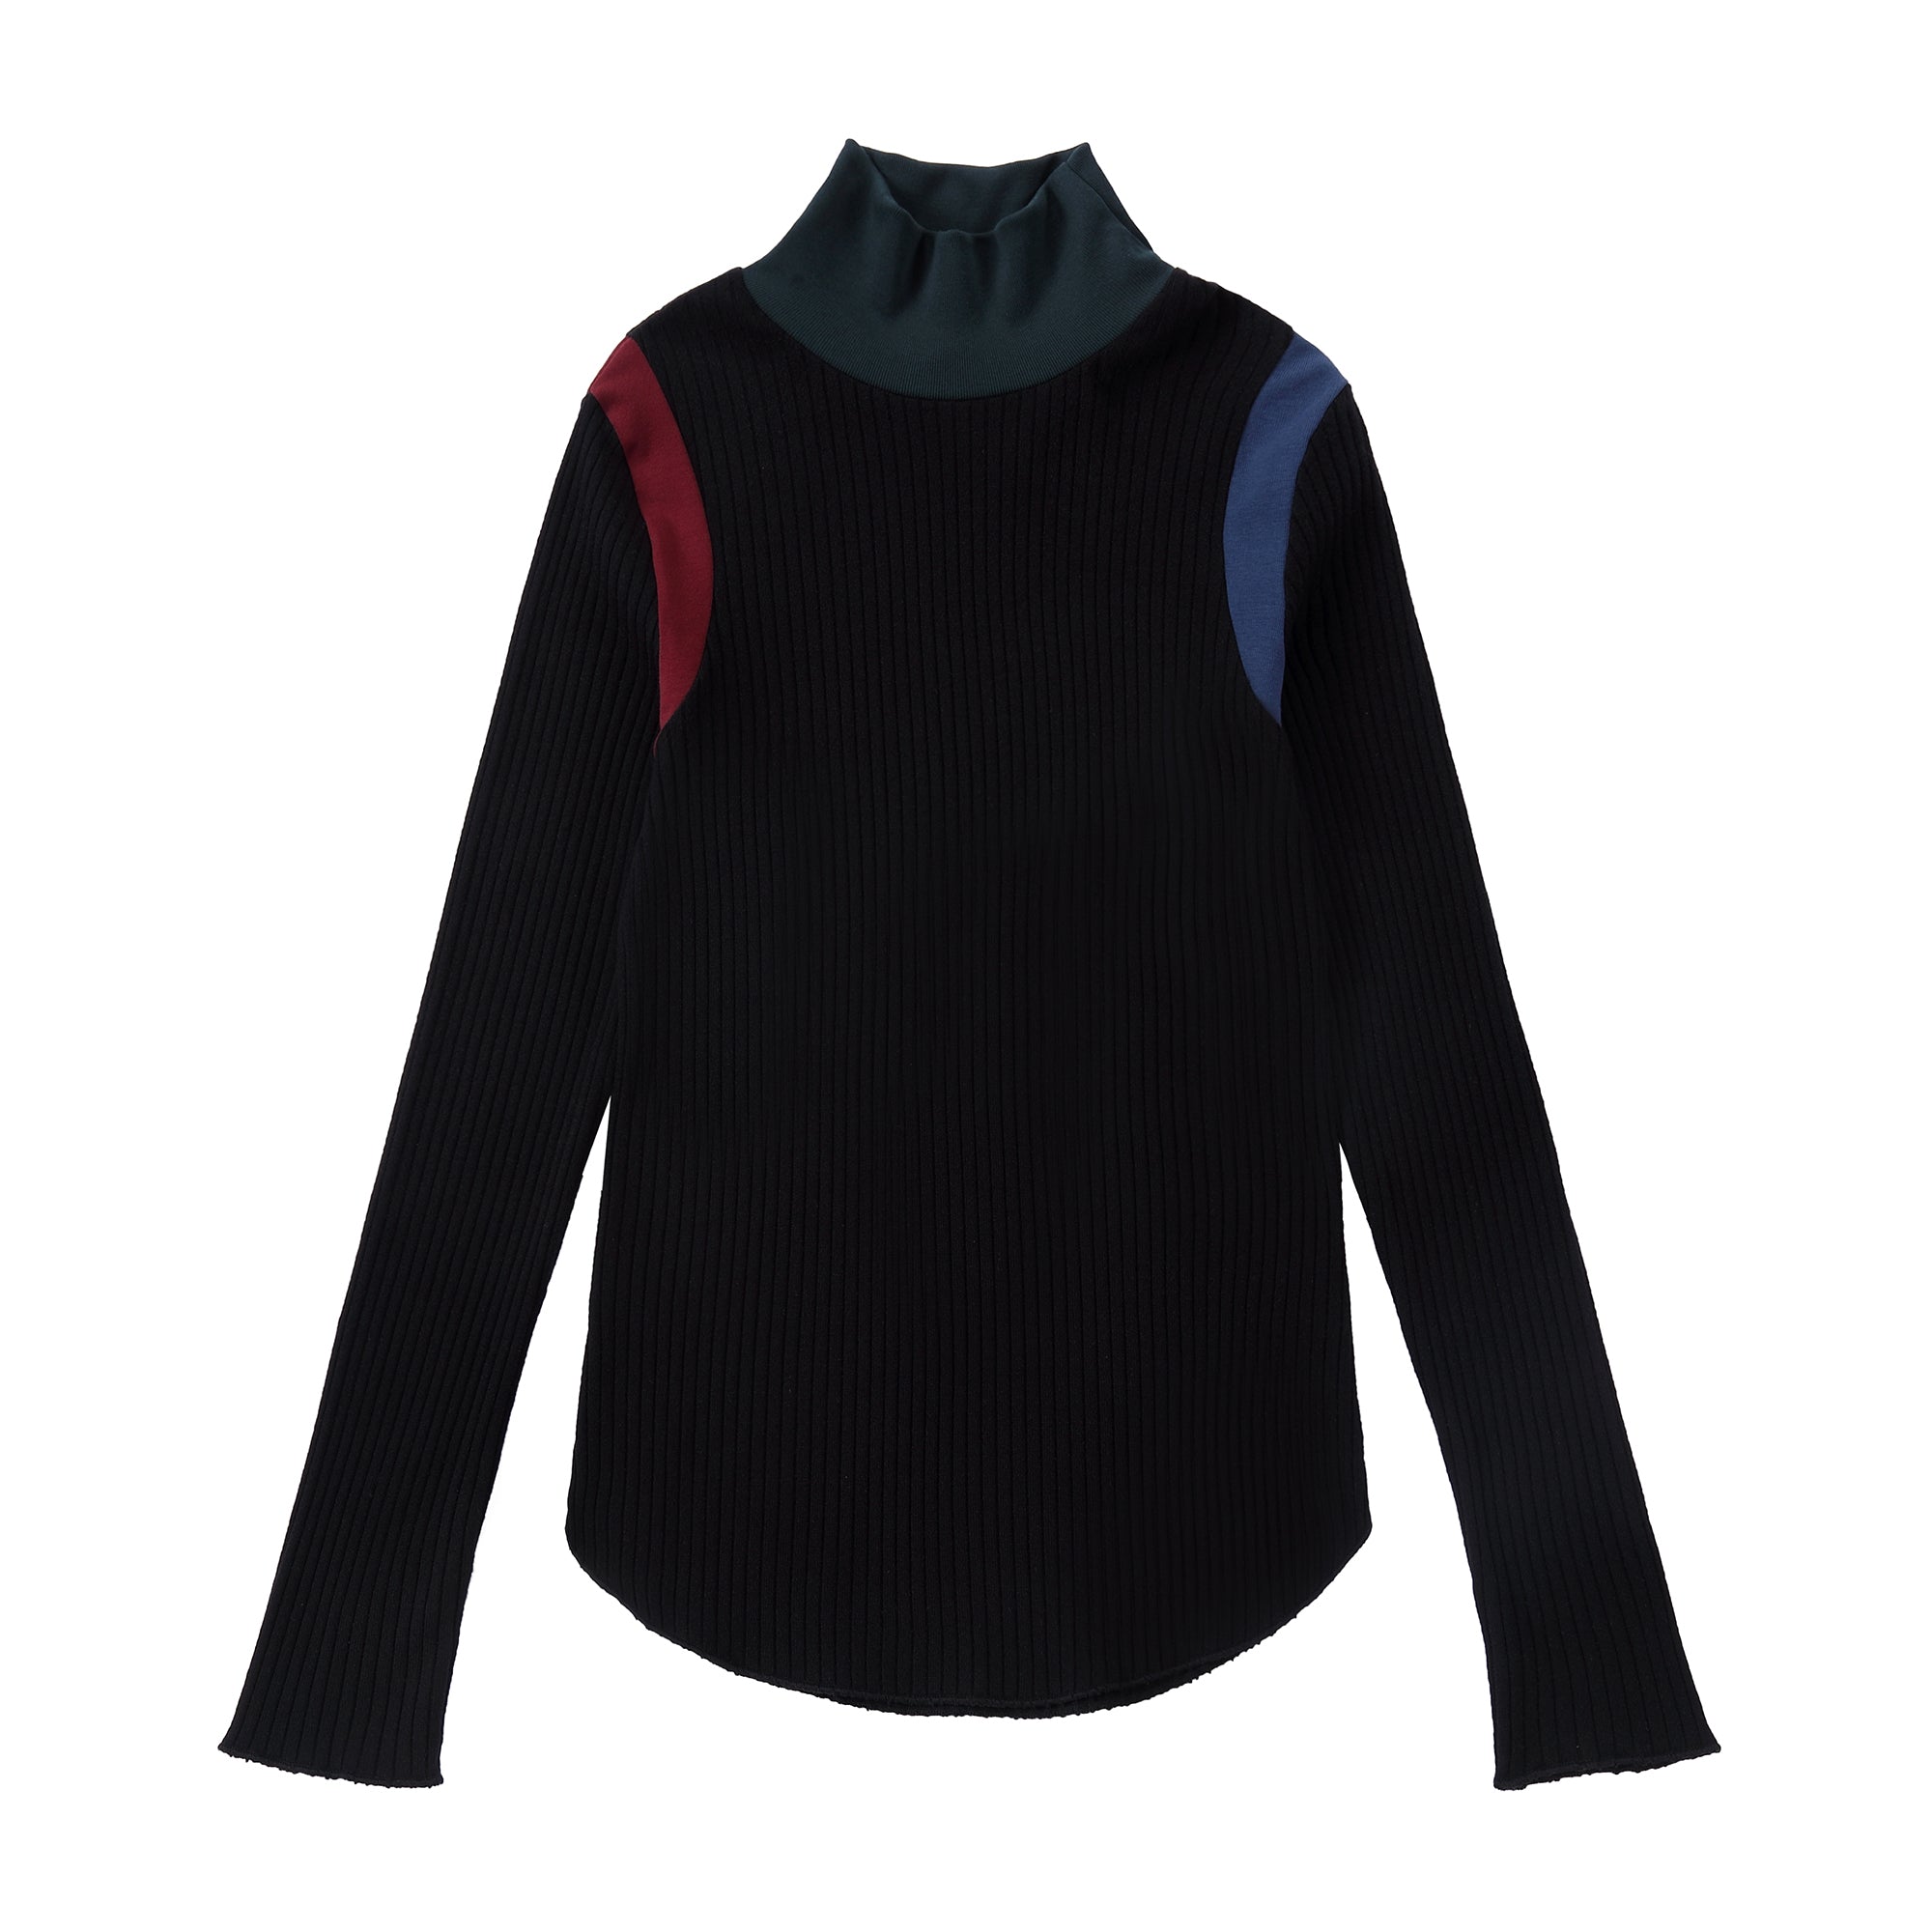 Black Rib Knit Turtle Neck With Jewel-Tone Accents